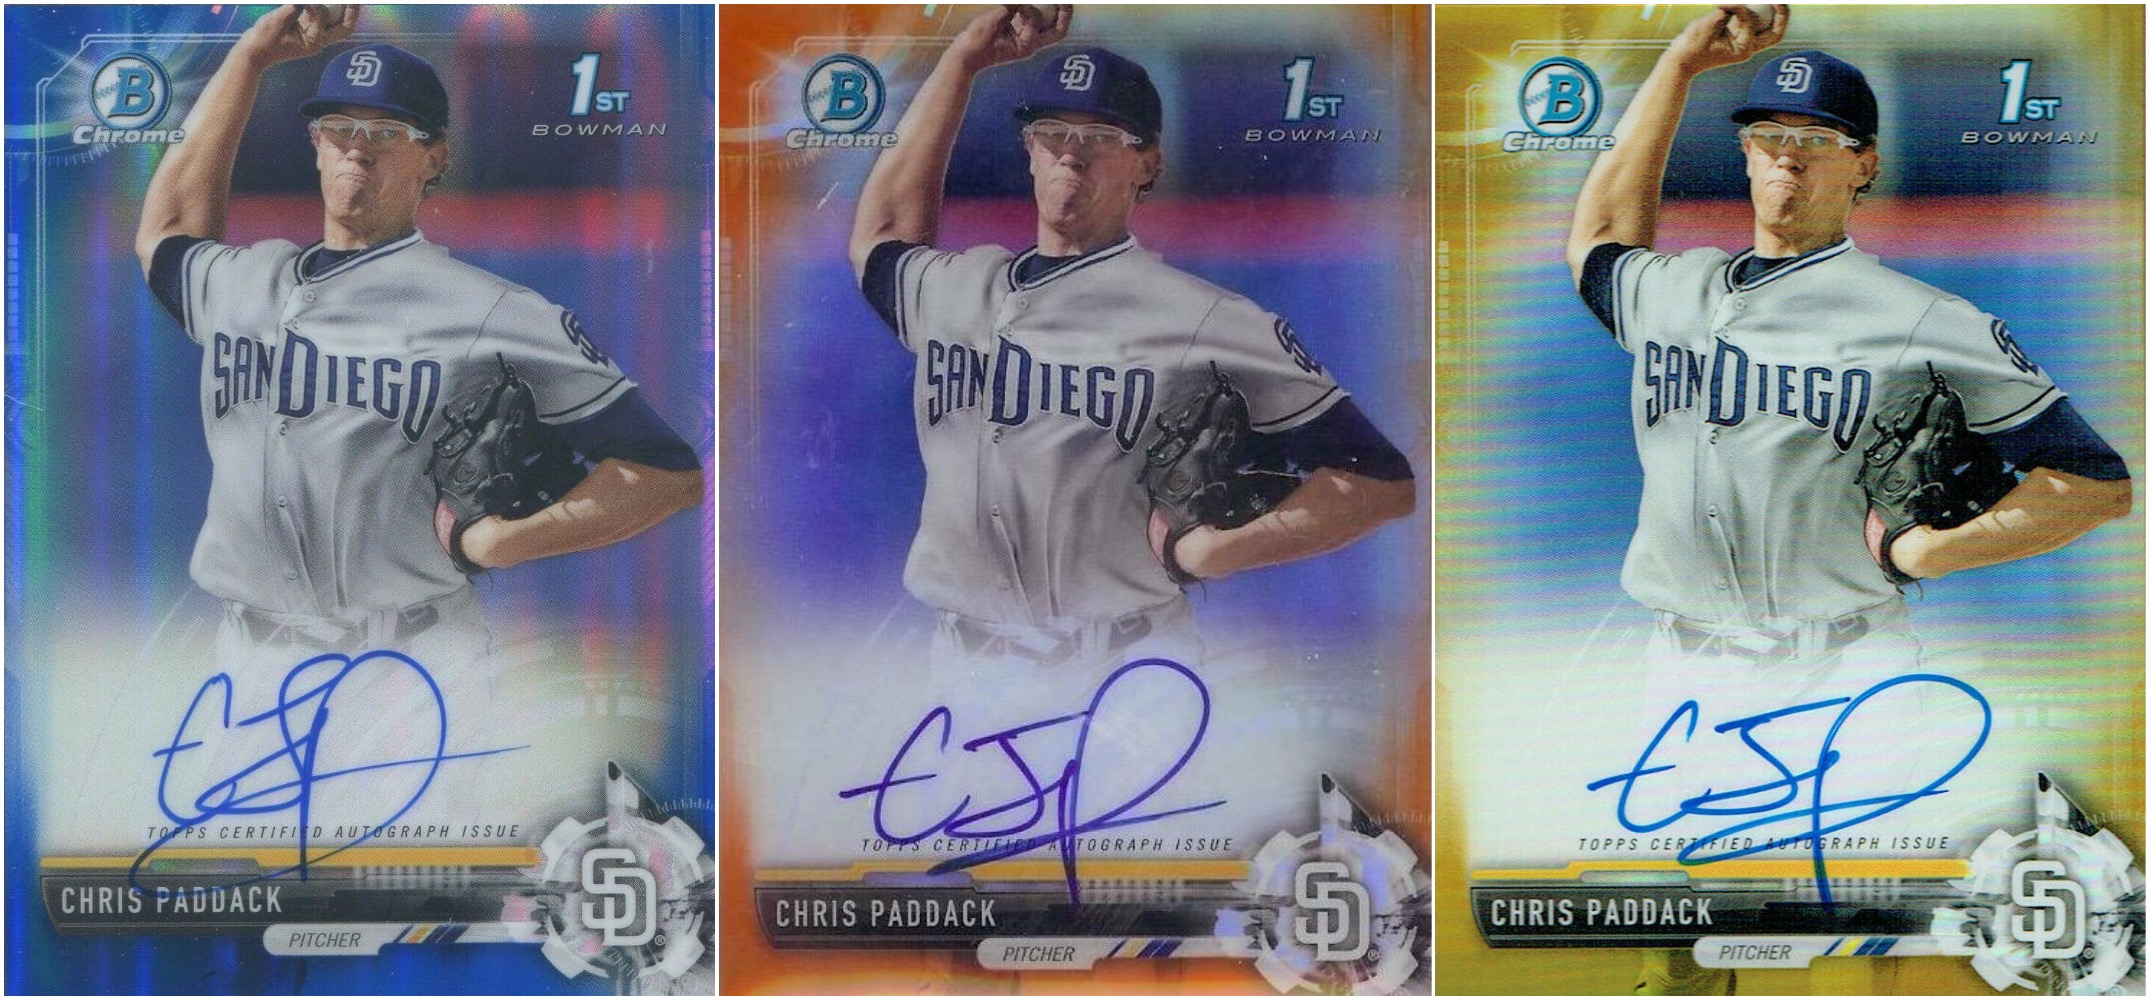 Three images of Chris Paddack sports trading cards